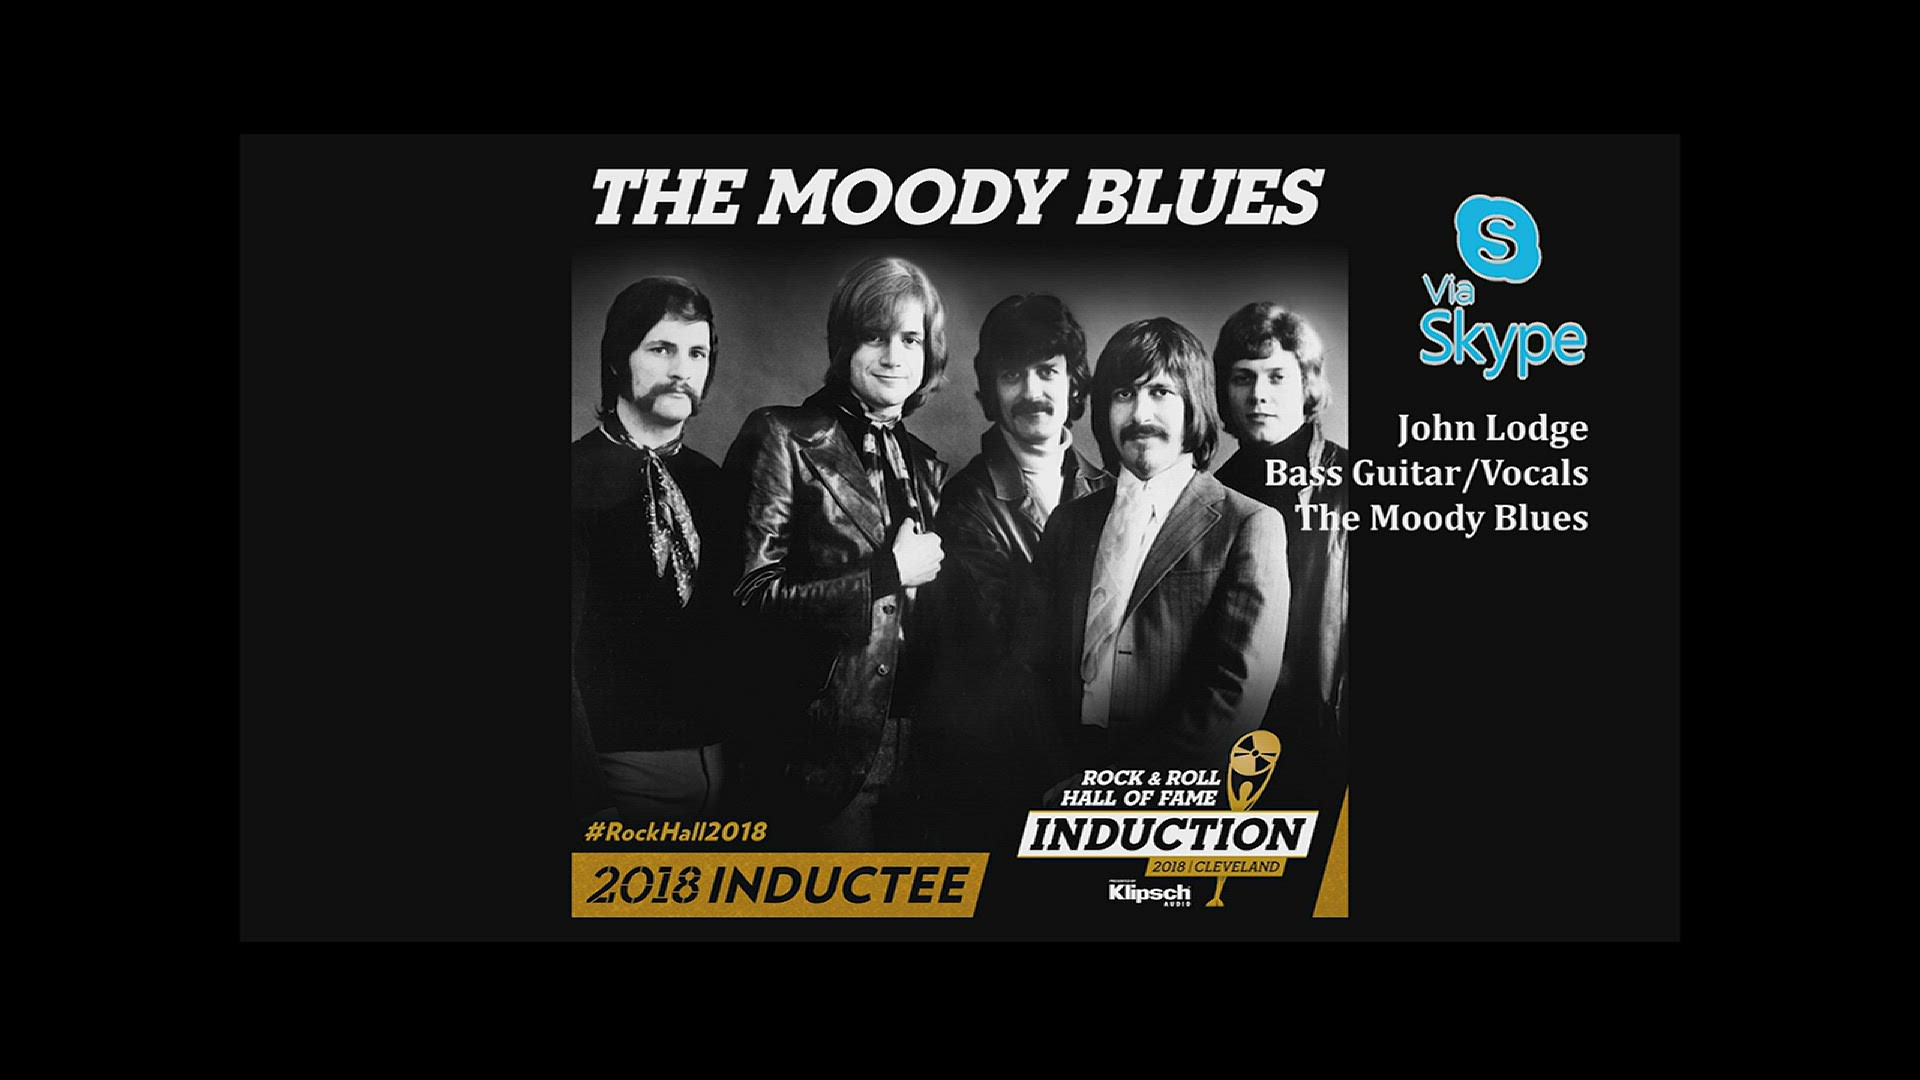 WKYC's Monica Robins chats with The Moody Blues' John Lodge about the news that he and his band mates are going to be inducted into the Rock and Roll Hall of Fame.